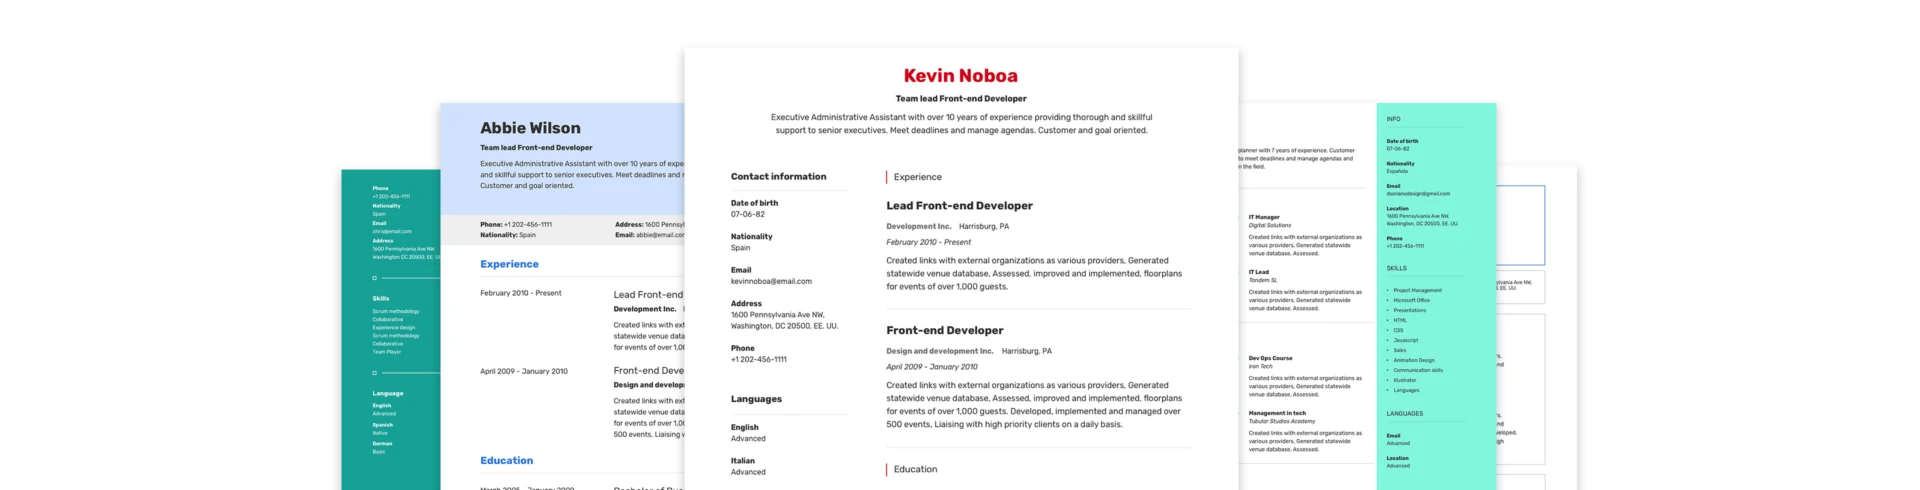 resume examples carousel